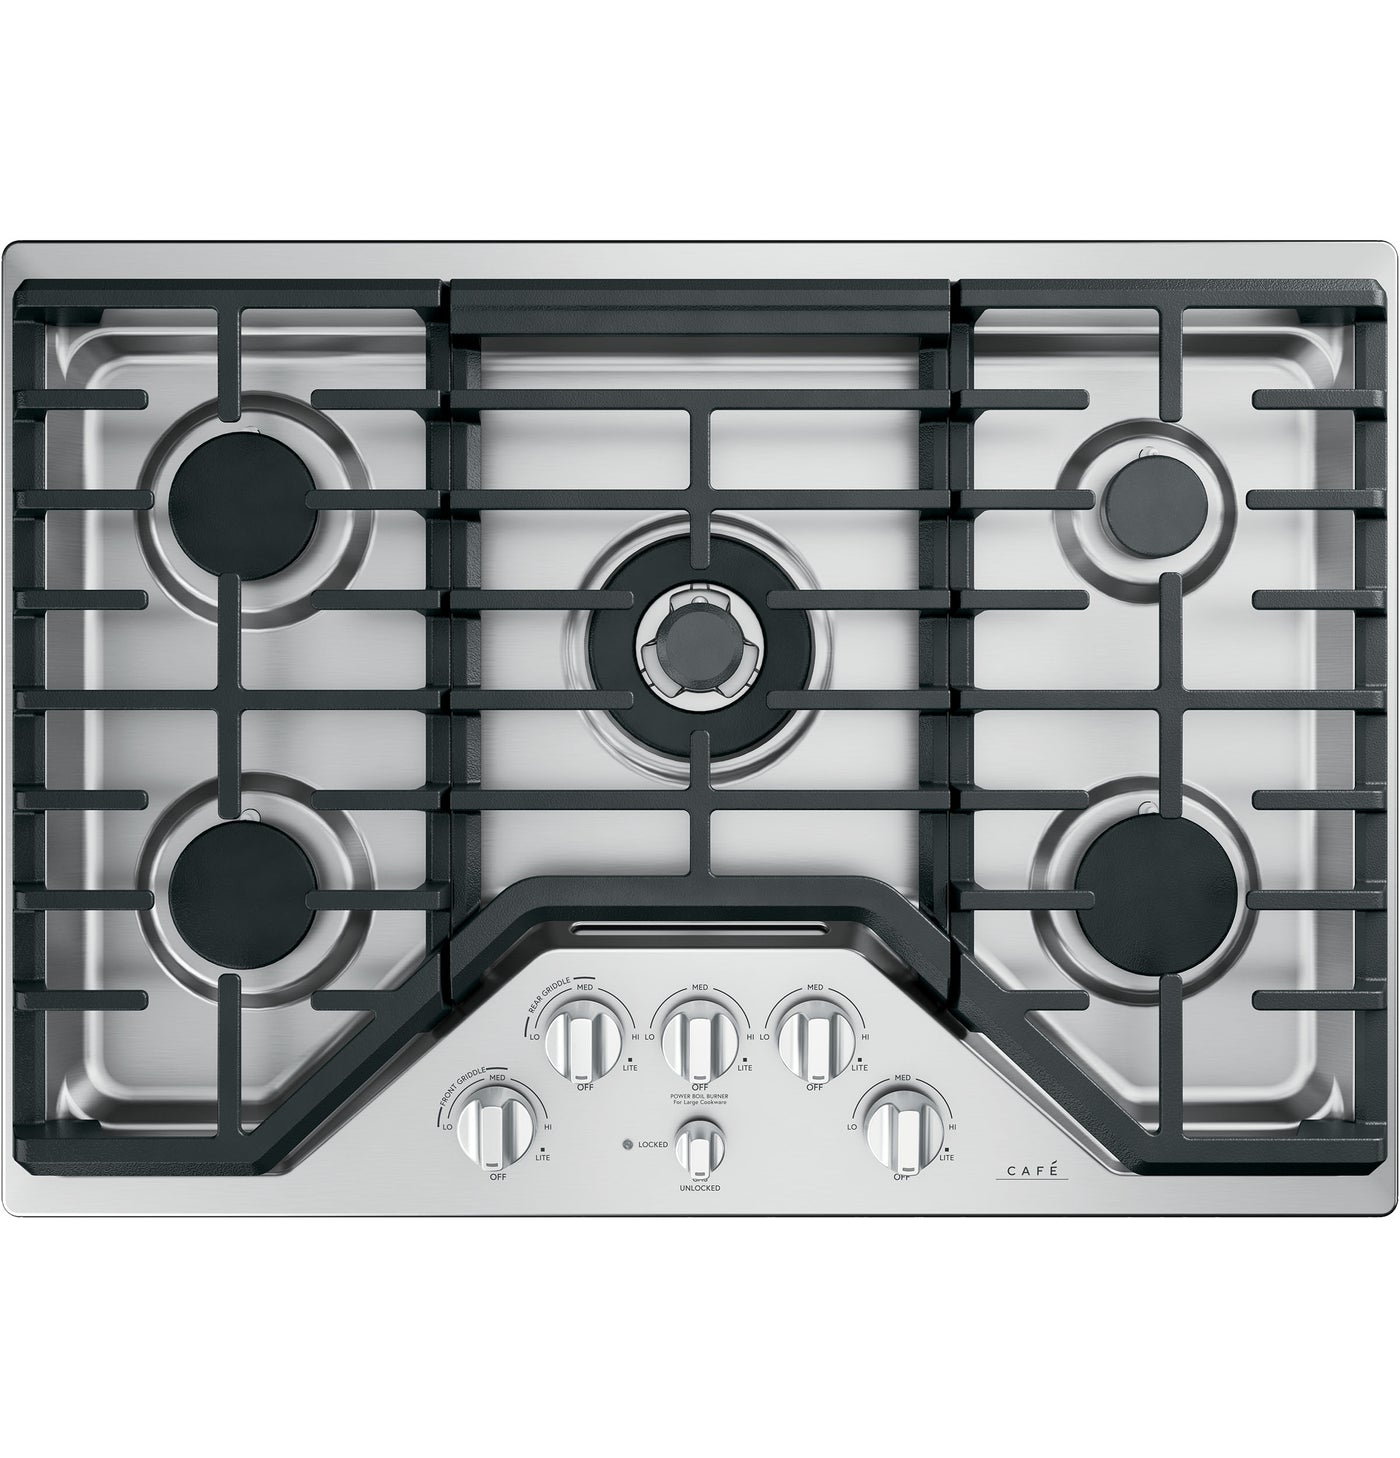 Café Stainless Steel 30" Built-In Gas Cooktop - CGP95302MS1